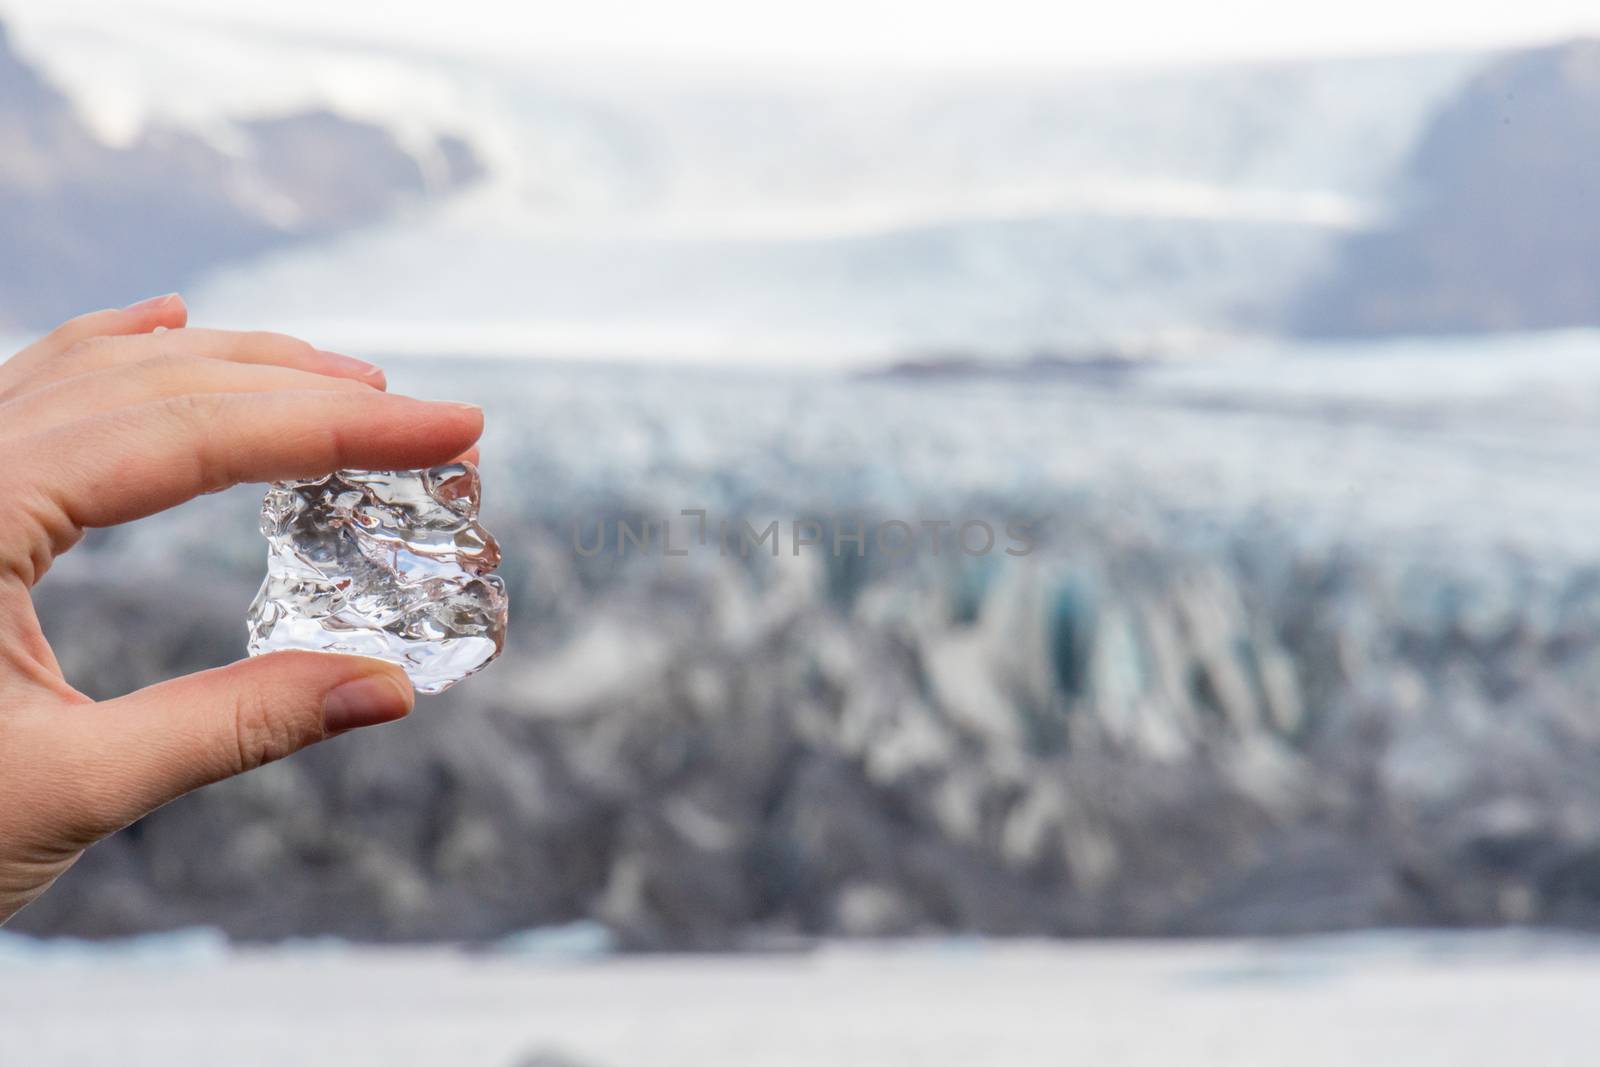 Vatnajoekull glacier in Iceland ice of the glacier between fingers in front of the deep blue ice crevices by MXW_Stock